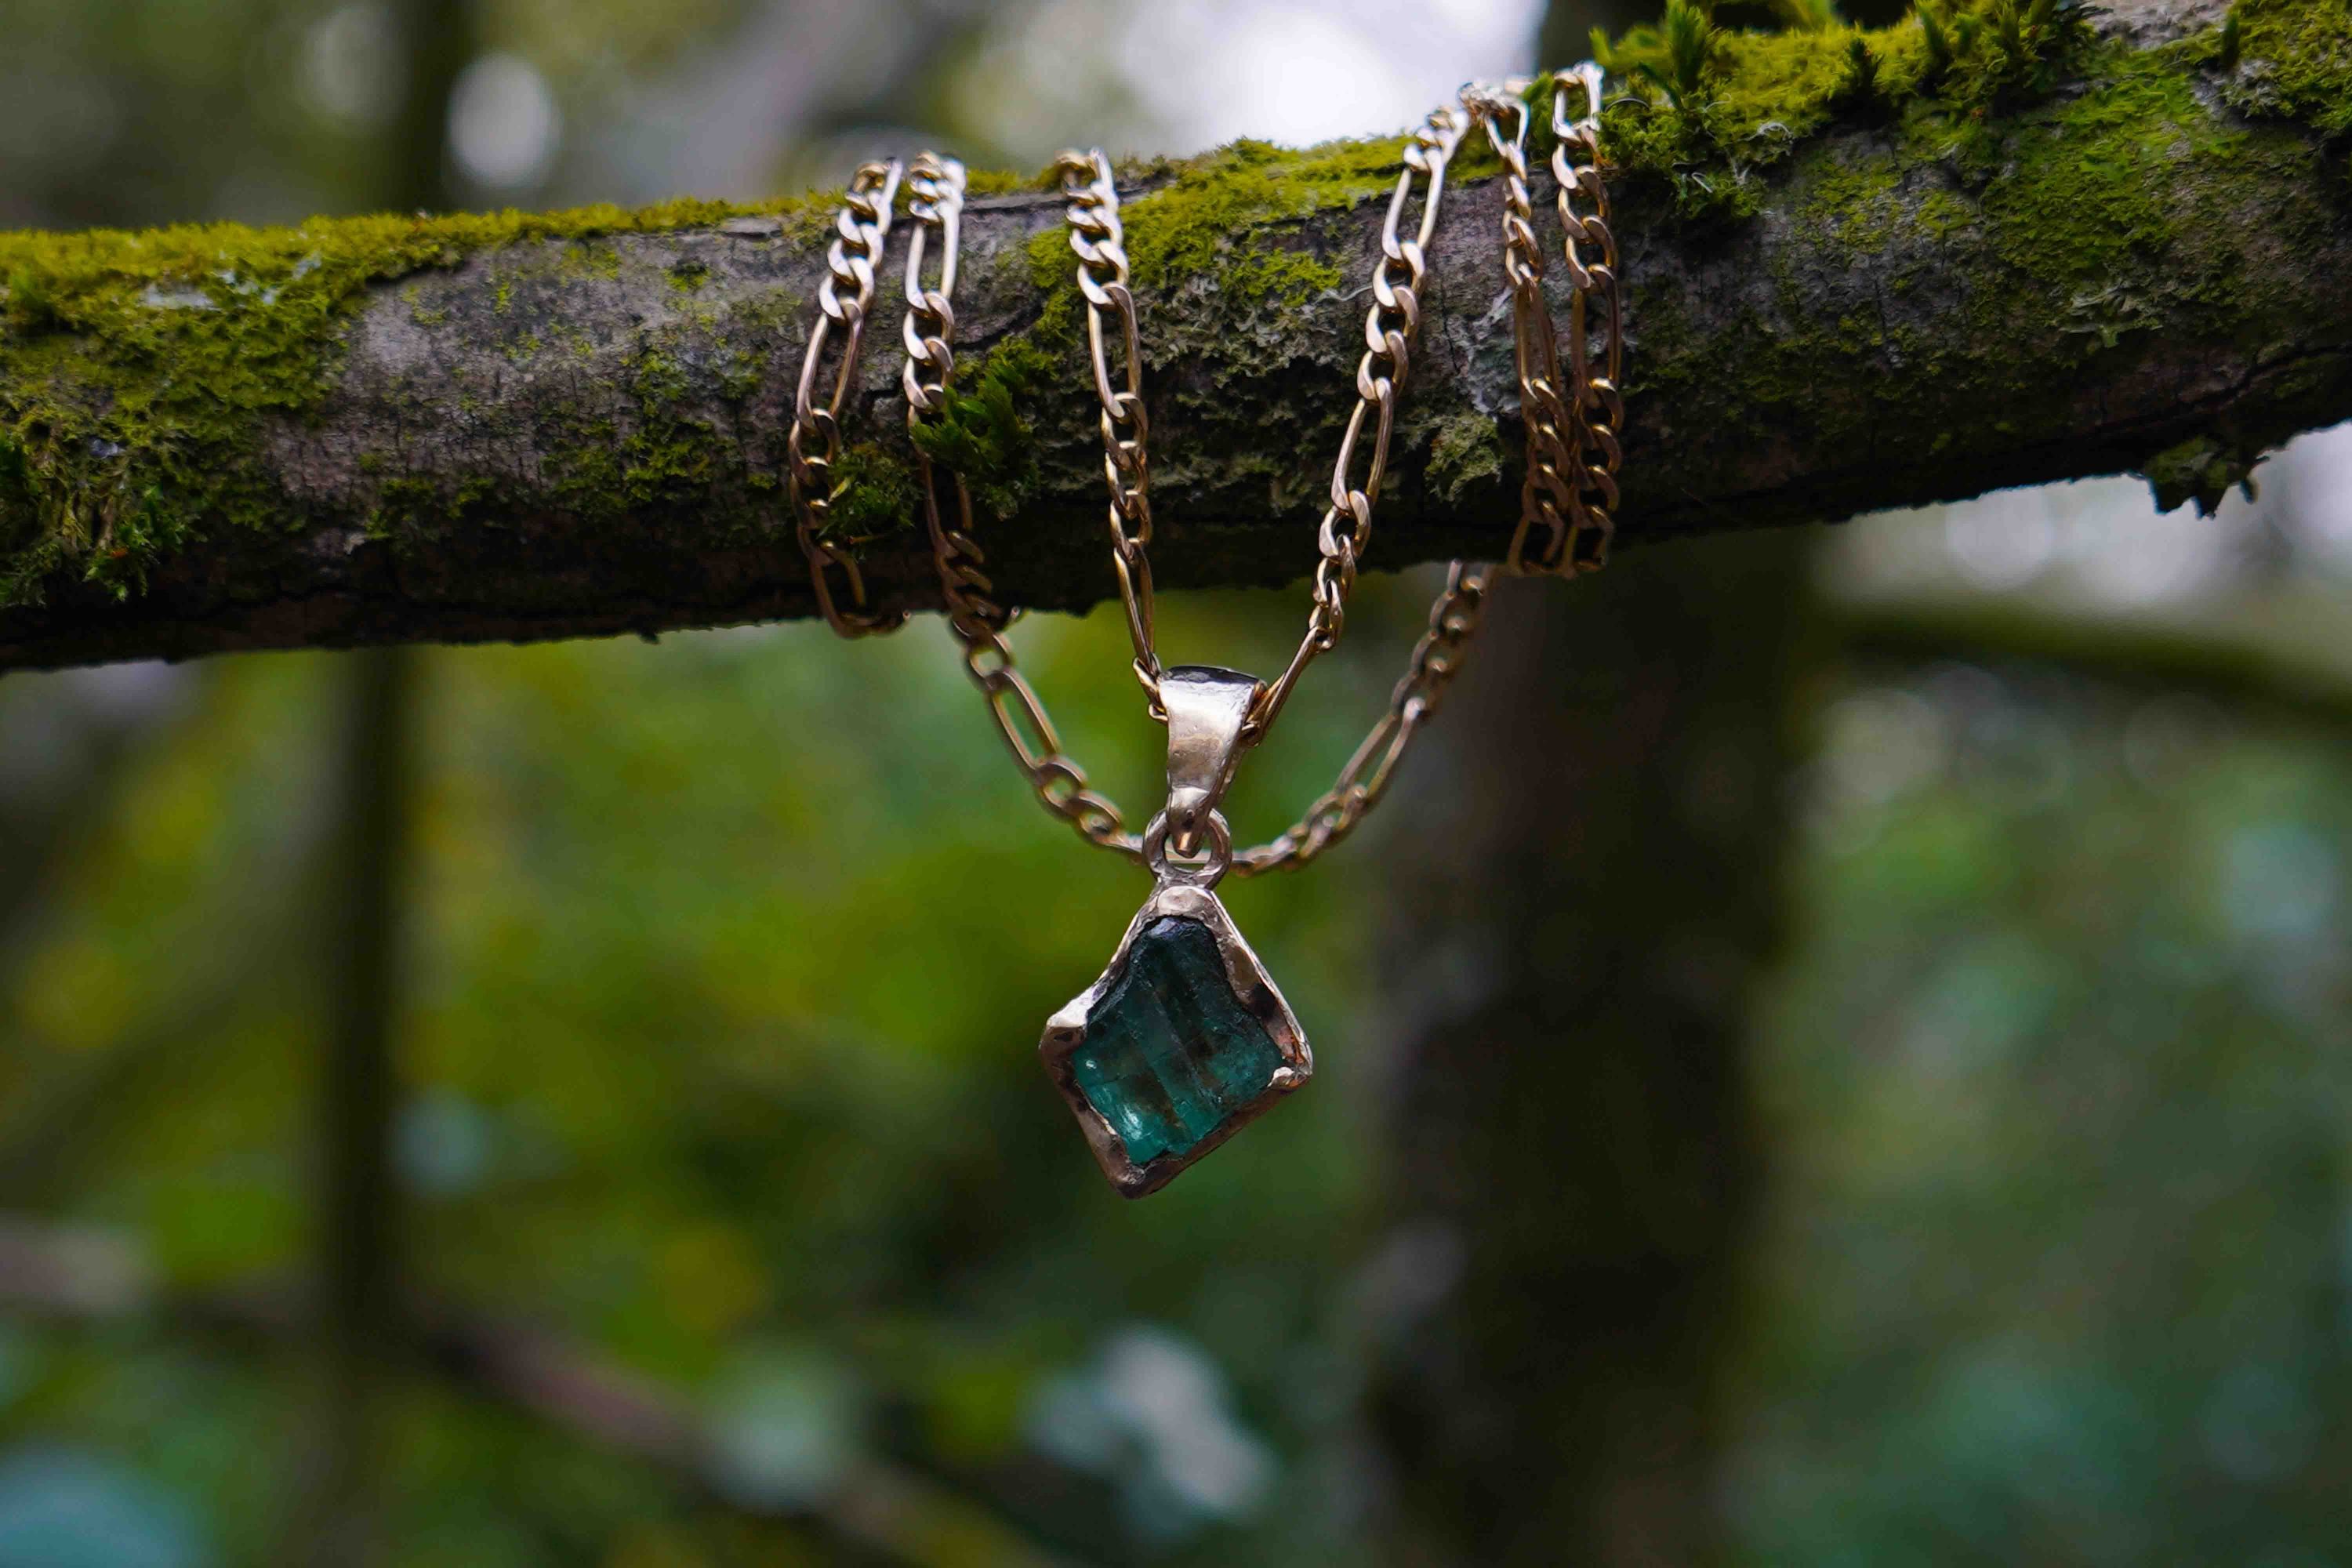 Bespoke necklace by Luke Brient, dangling from a branch